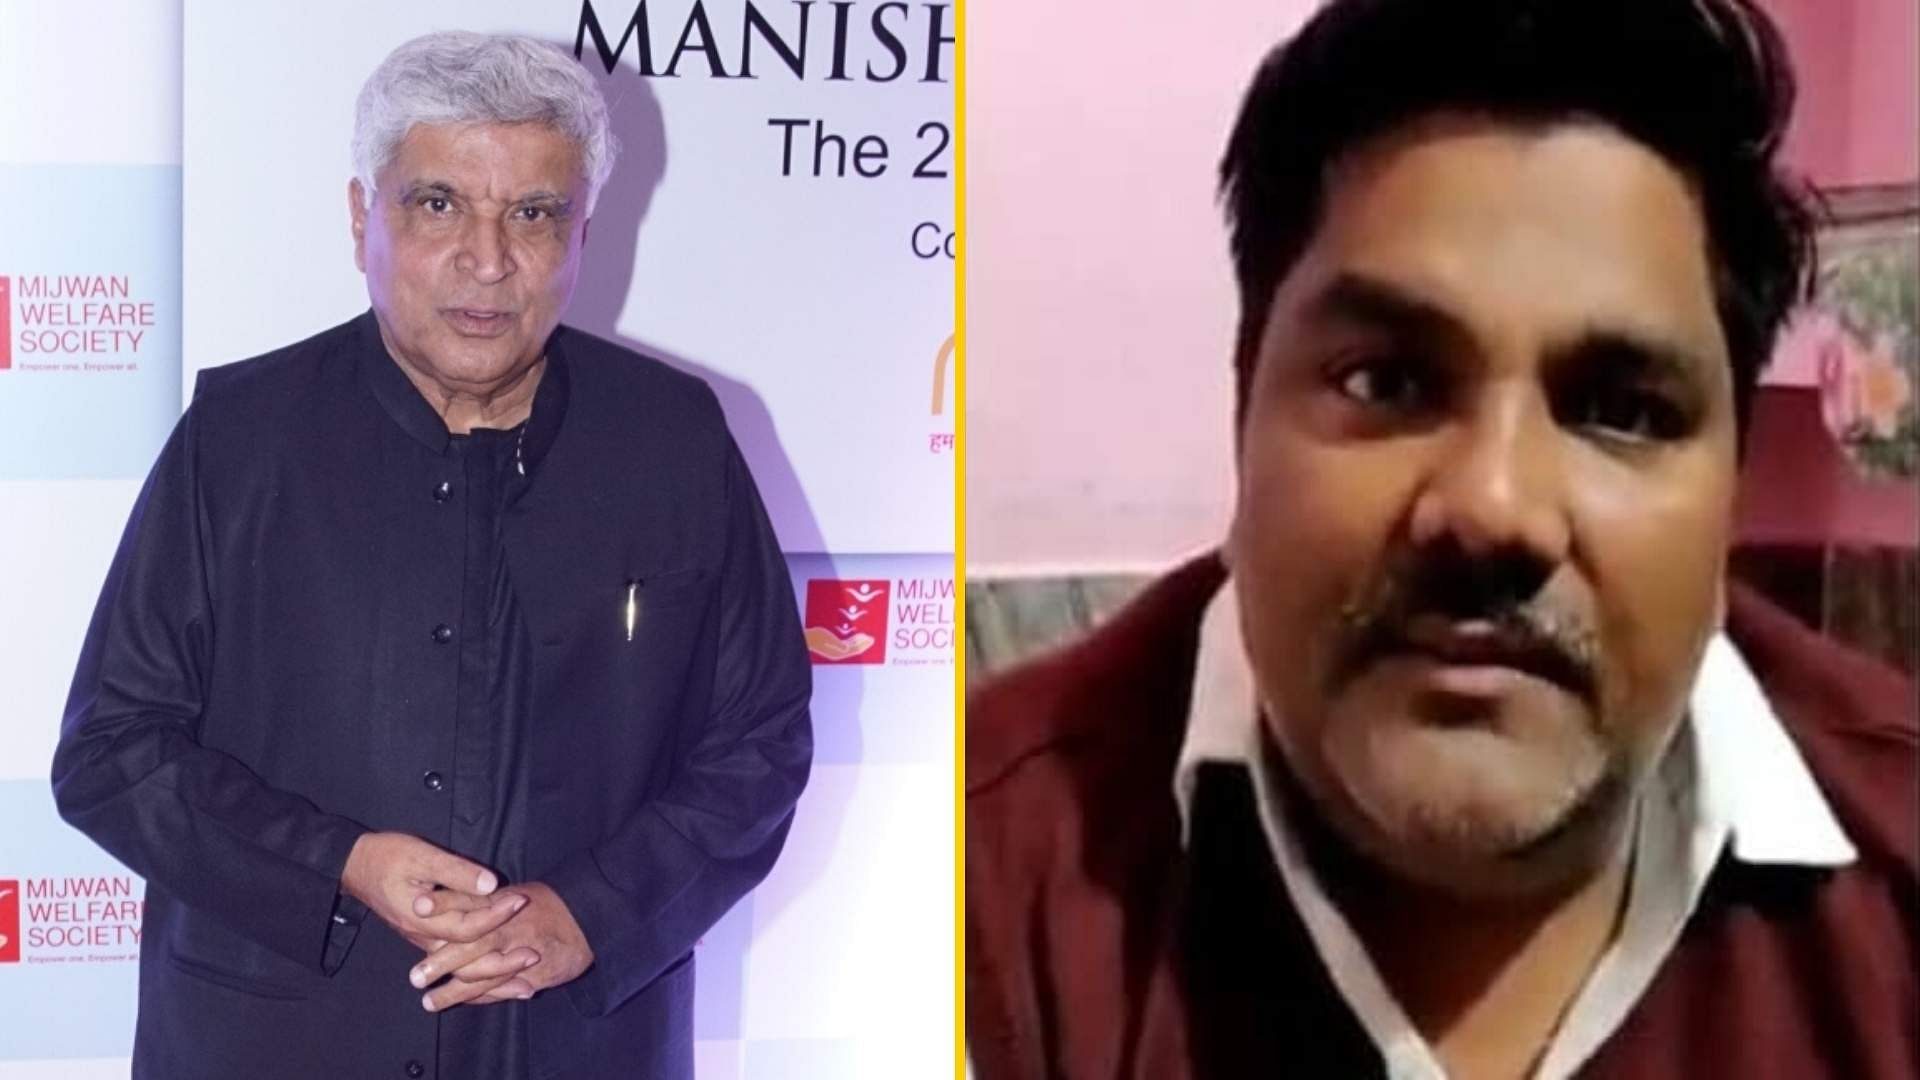 A complaint has been filed against Javed Akhtar over his remarks on former AAP Councillor Tahir Hussain.